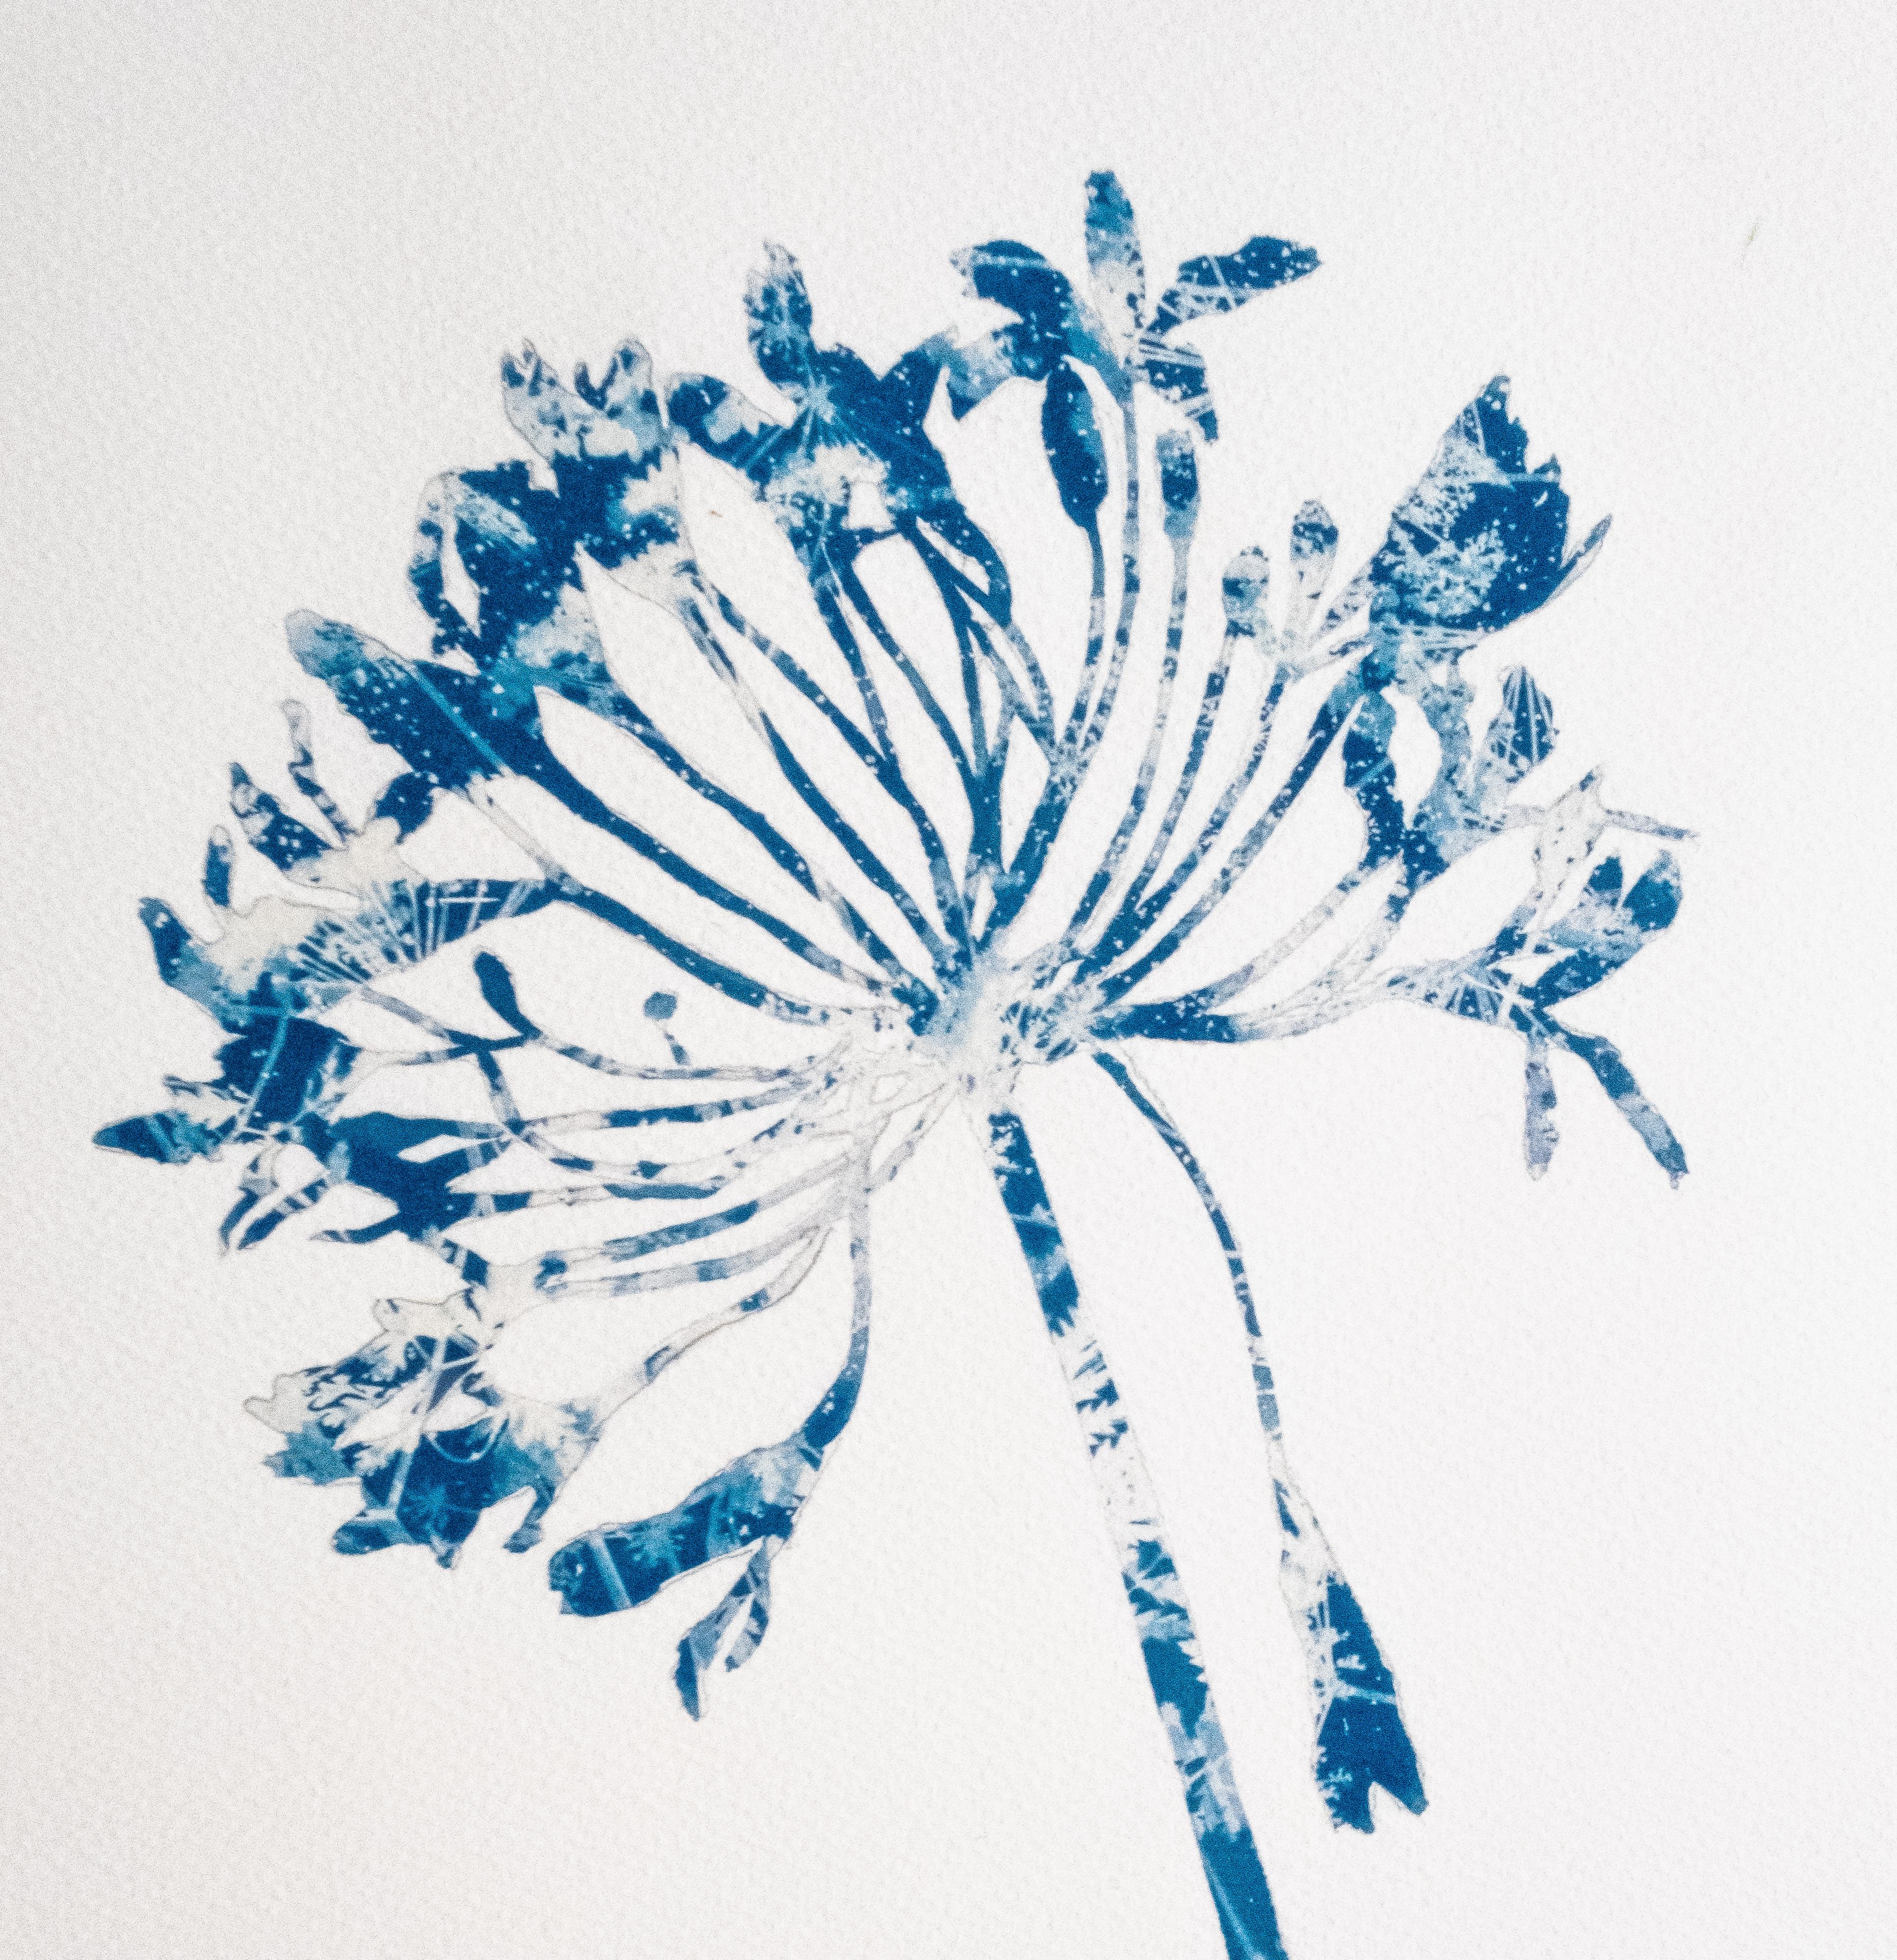 Unframed. 

This is a combination of painting and photography, the antique cyanotype process. The silhouette of the plant was first drawn, then painted not with ink or paint, but with light-sensitive photo emulsion. The blue and white pattern seen